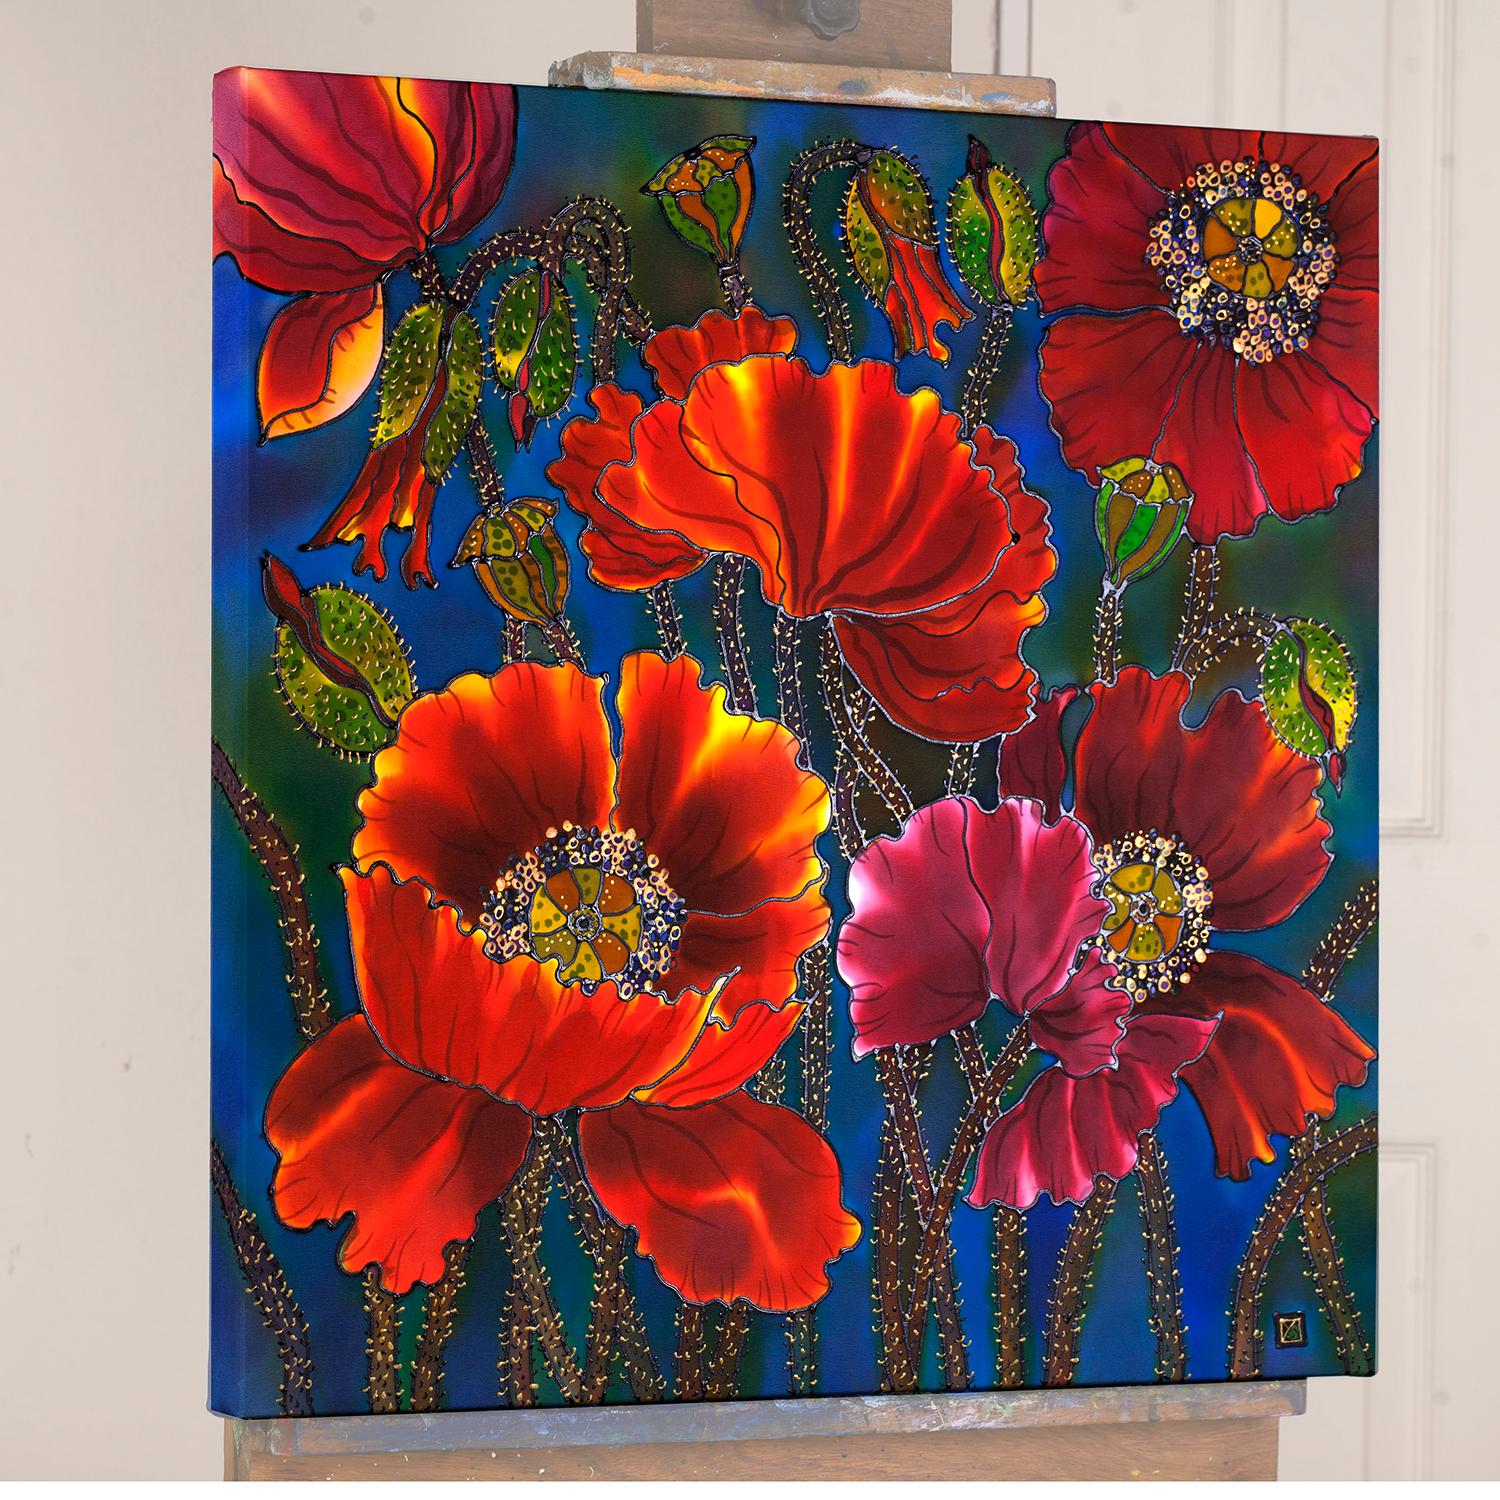 <p>Artist Comments<br /> Poppies are one of my favorite subject to paint. They are cheerful and a pleasure for the eyes. I love how flowers appear on silk.   This piece is made using dyes and acrylic paints on Chinese silk. When applied, liquid dyes